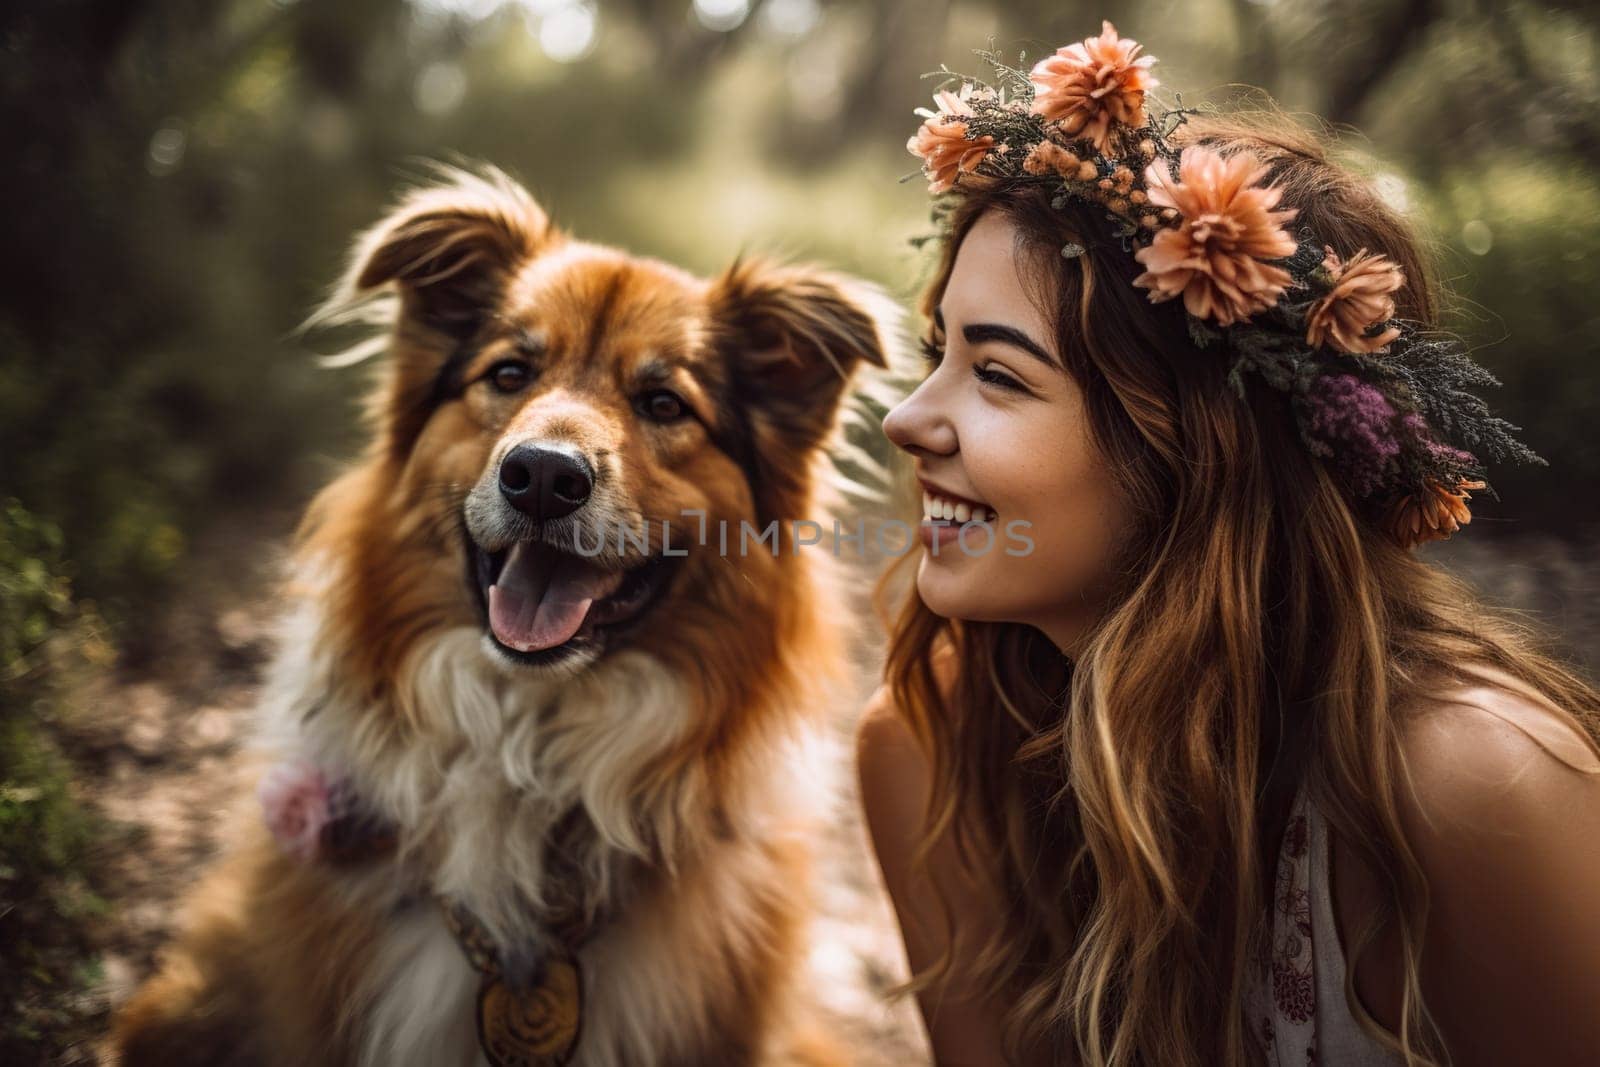 In An Outdoor Setting Filled With Natural Light, A Young Individual With A Vibrant Hairstyle Engages In A Joyful Interaction With Their Exuberant Dog